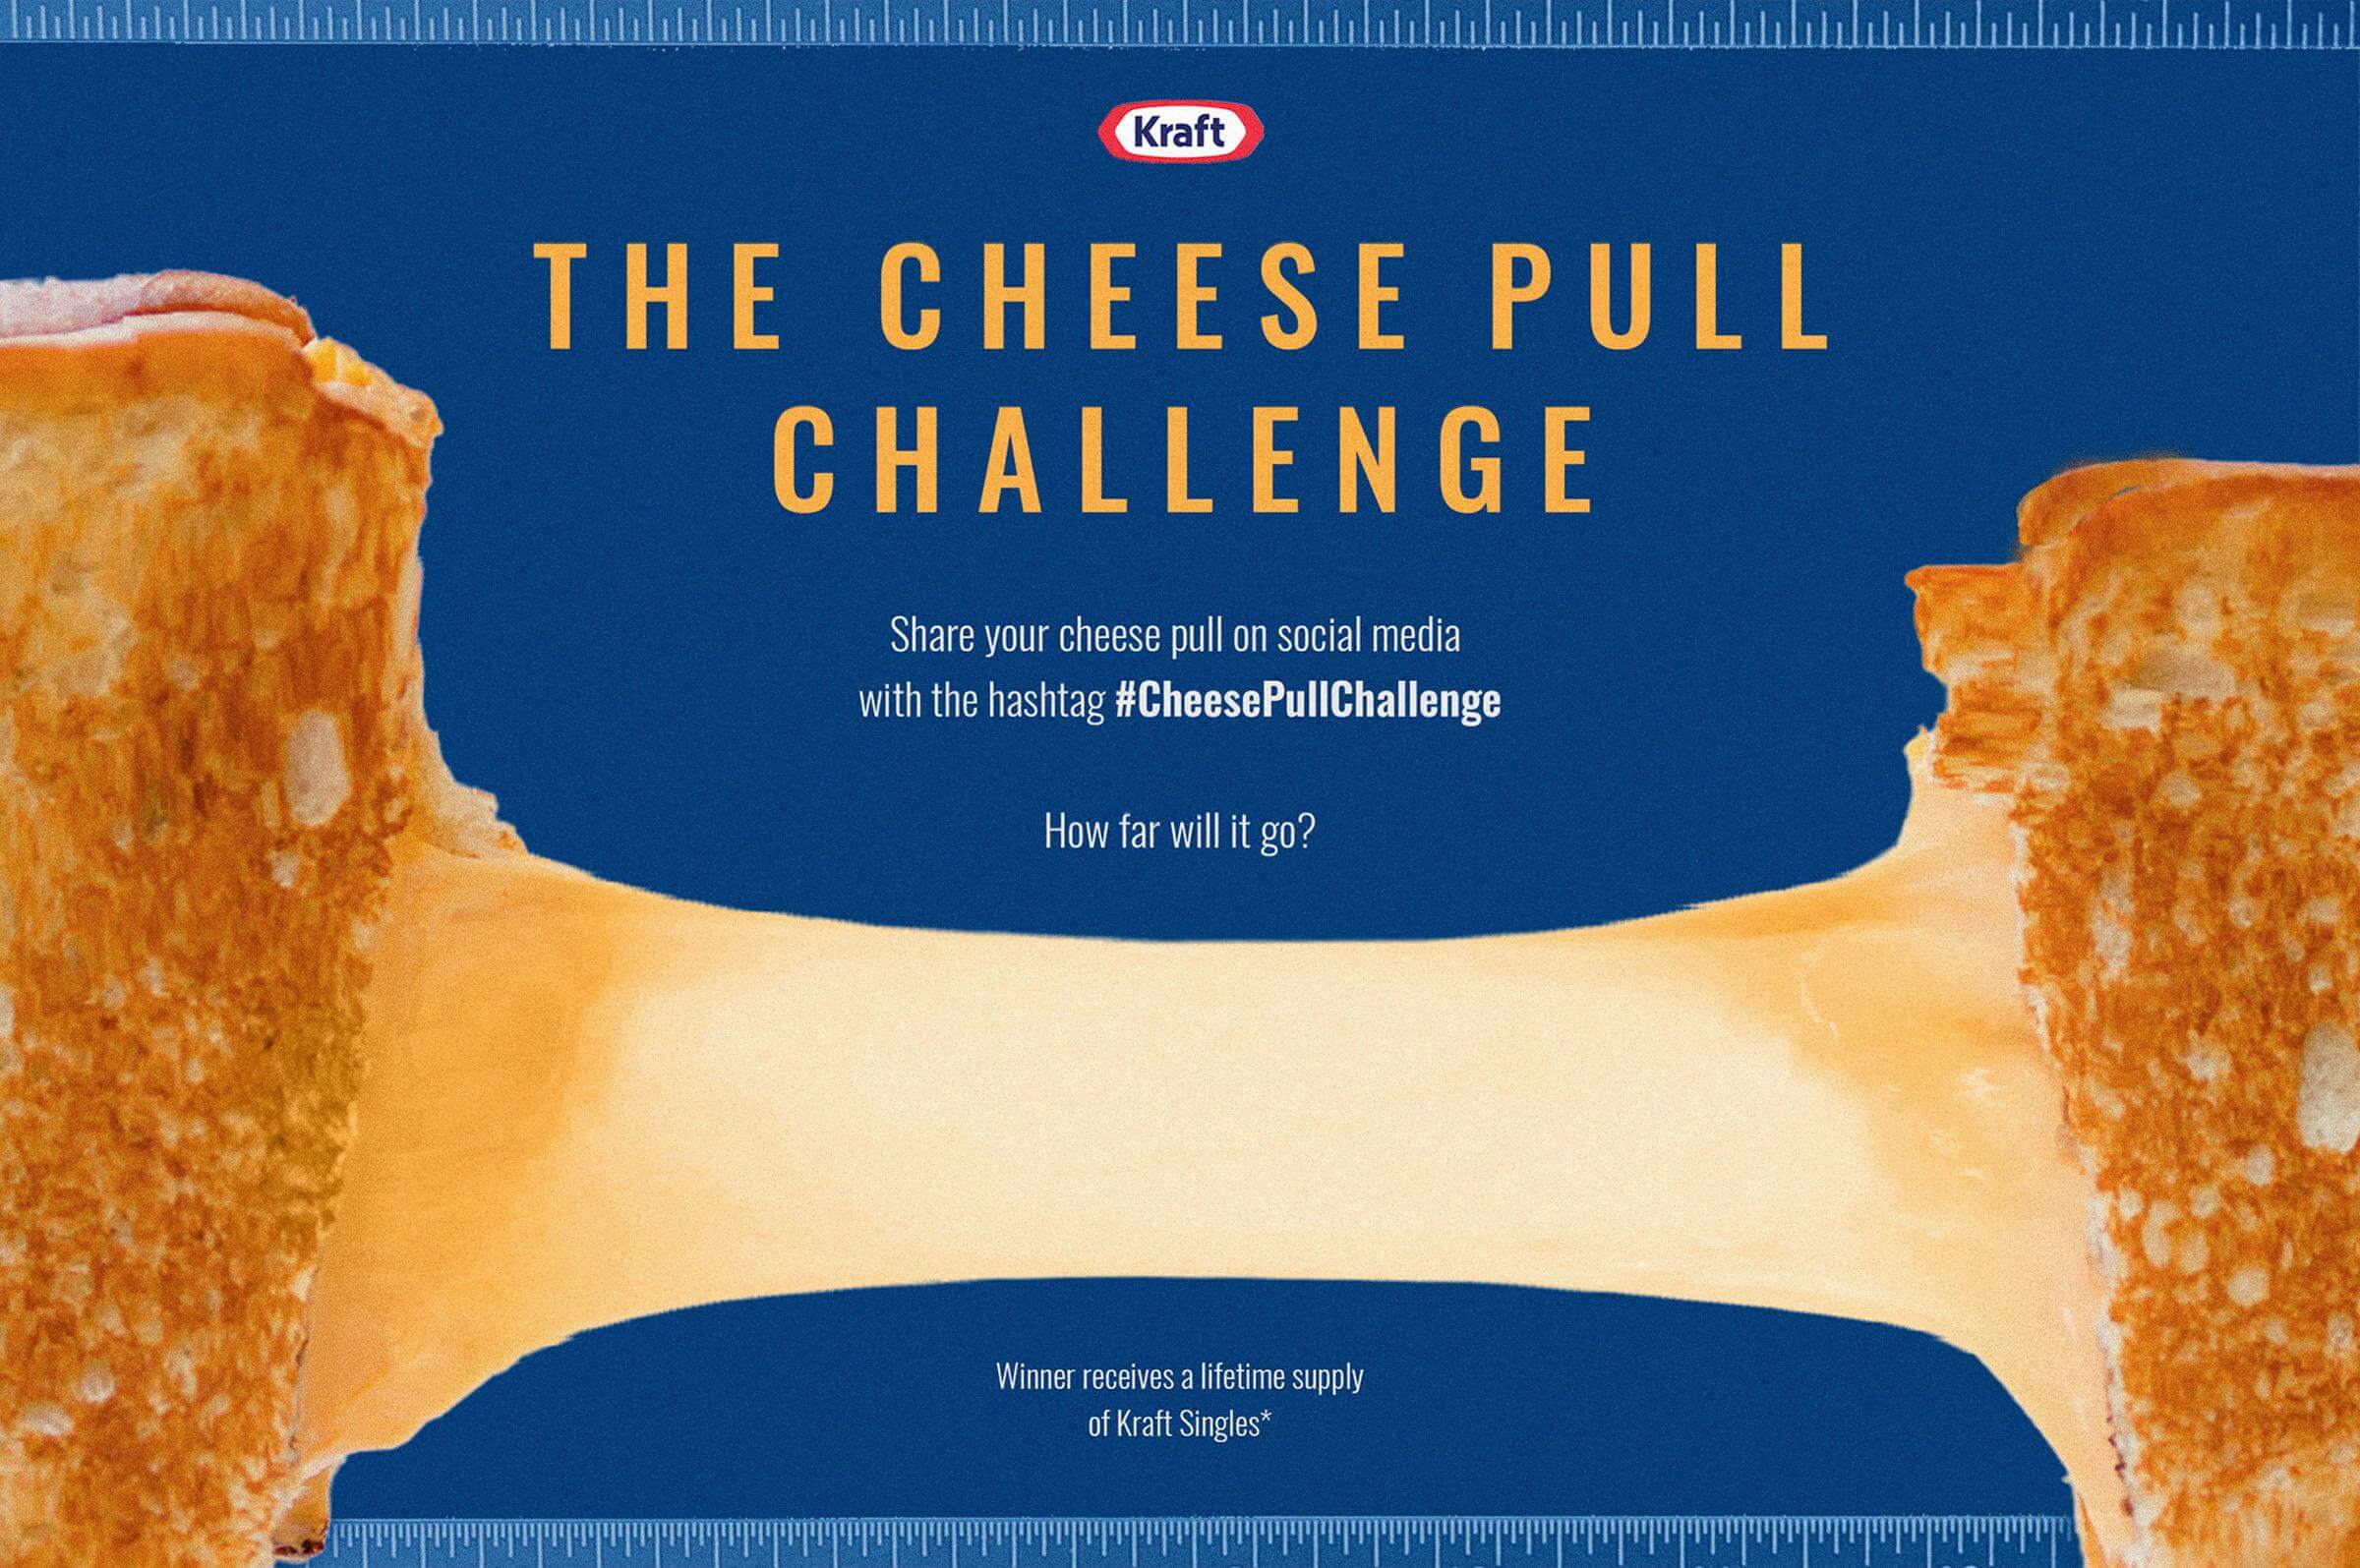 The Cheese Pull Challenge